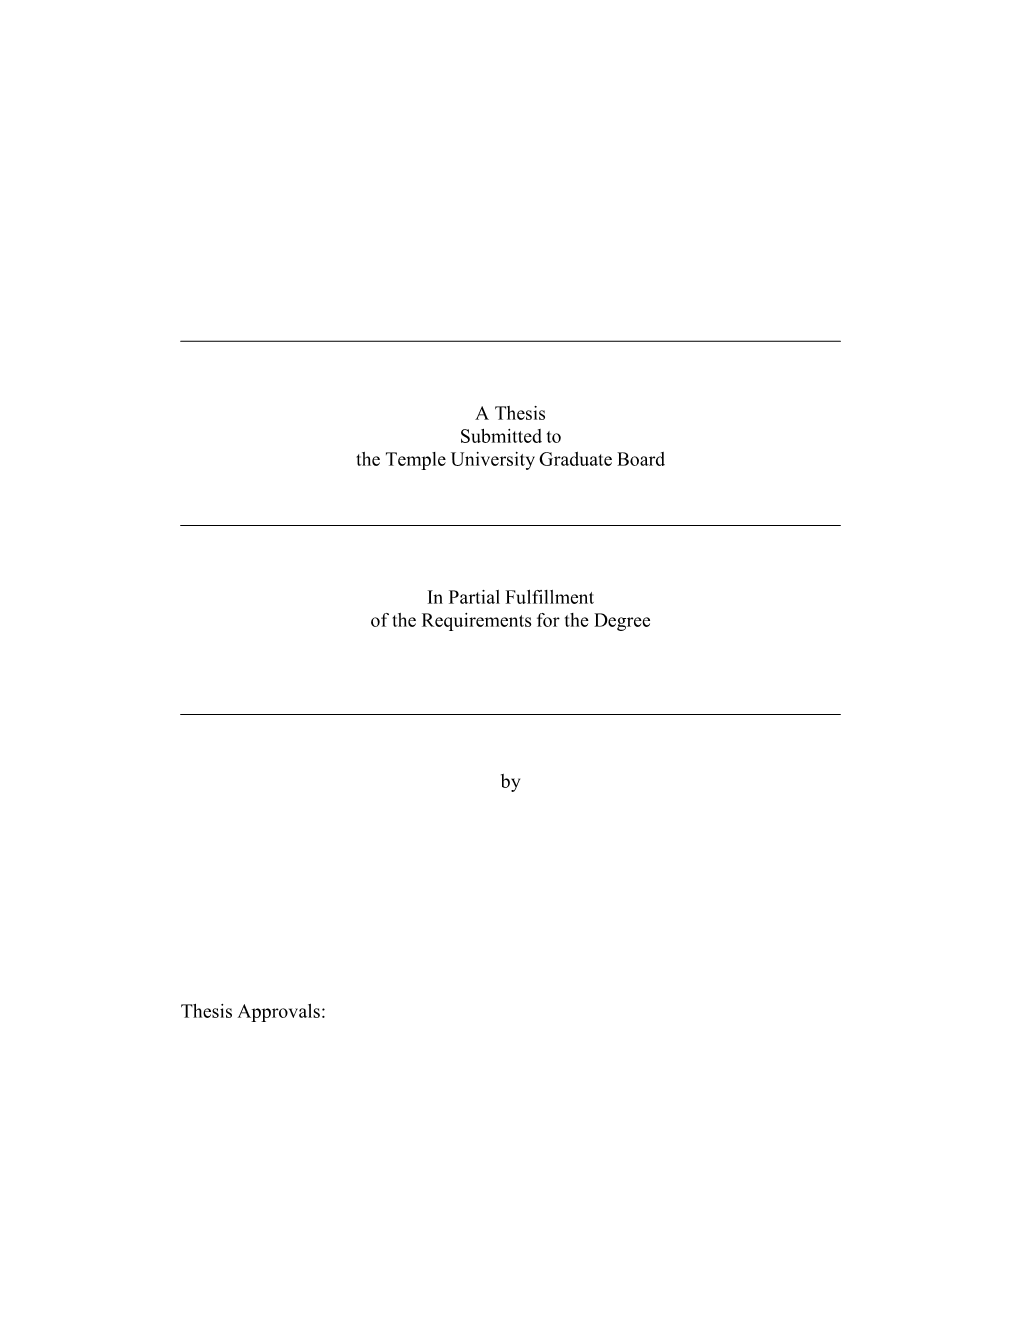 A Thesis Submitted to the Temple University Graduate Board in Partial